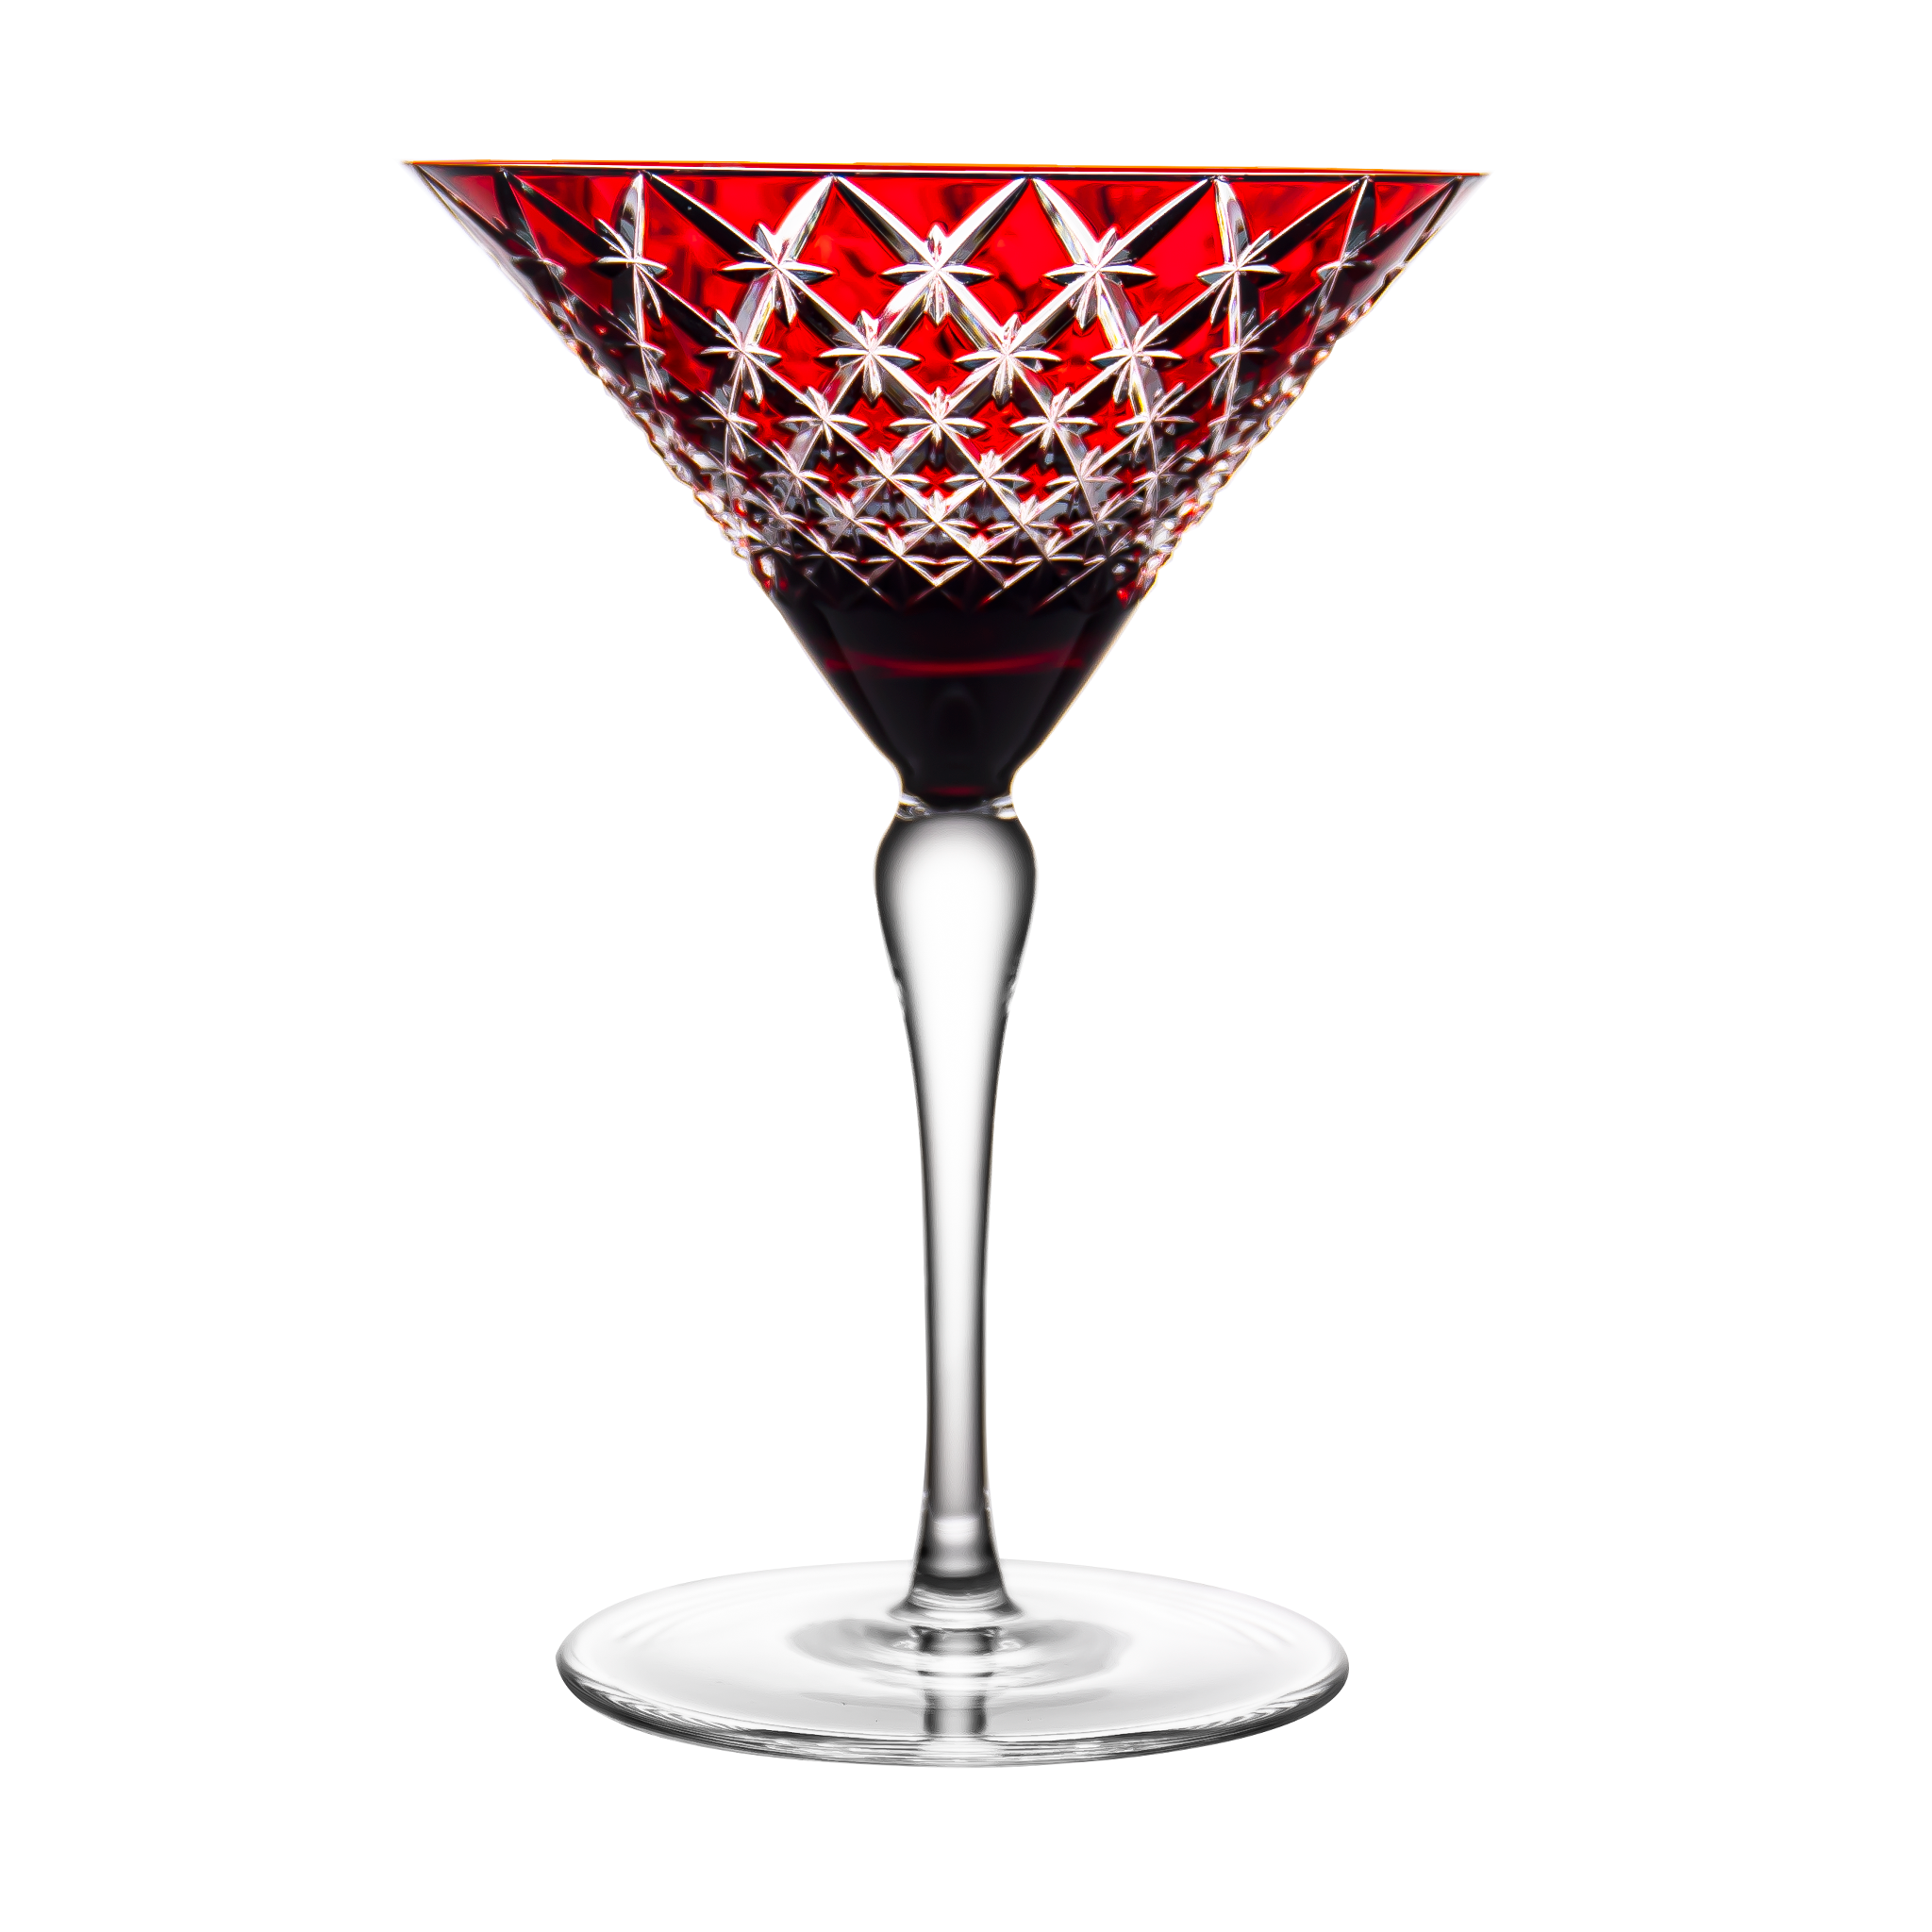 Pair of Tall Red Martini Glasses/red Bowl Clear Stem Cocktail Glasses 